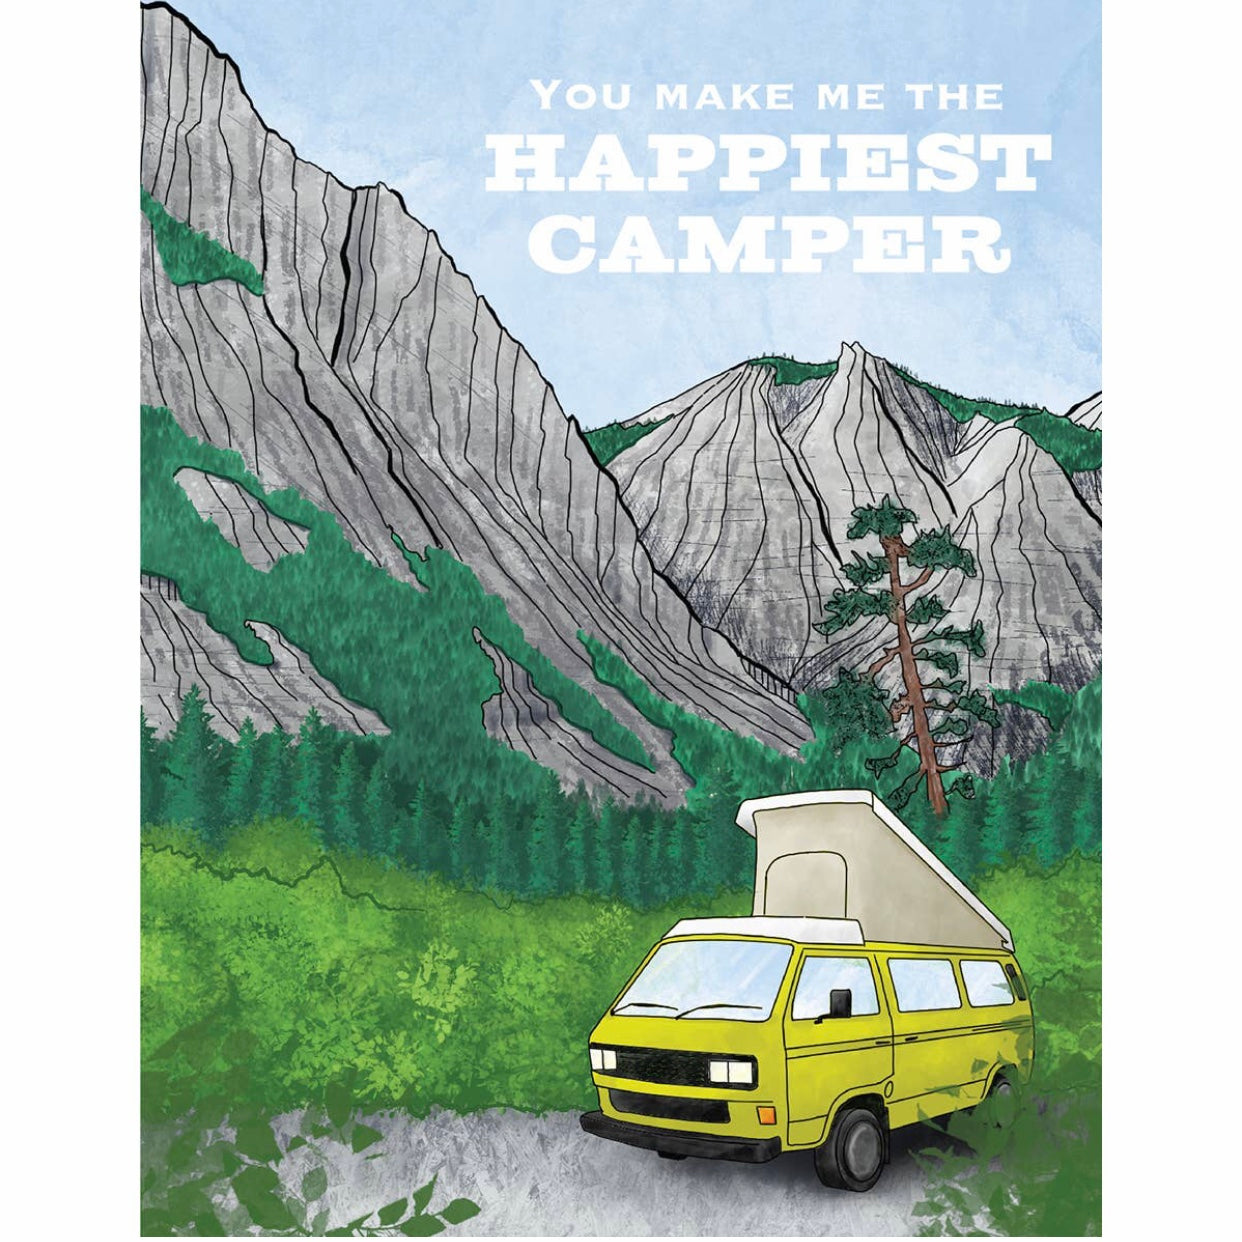 Happiest Camper greeting card